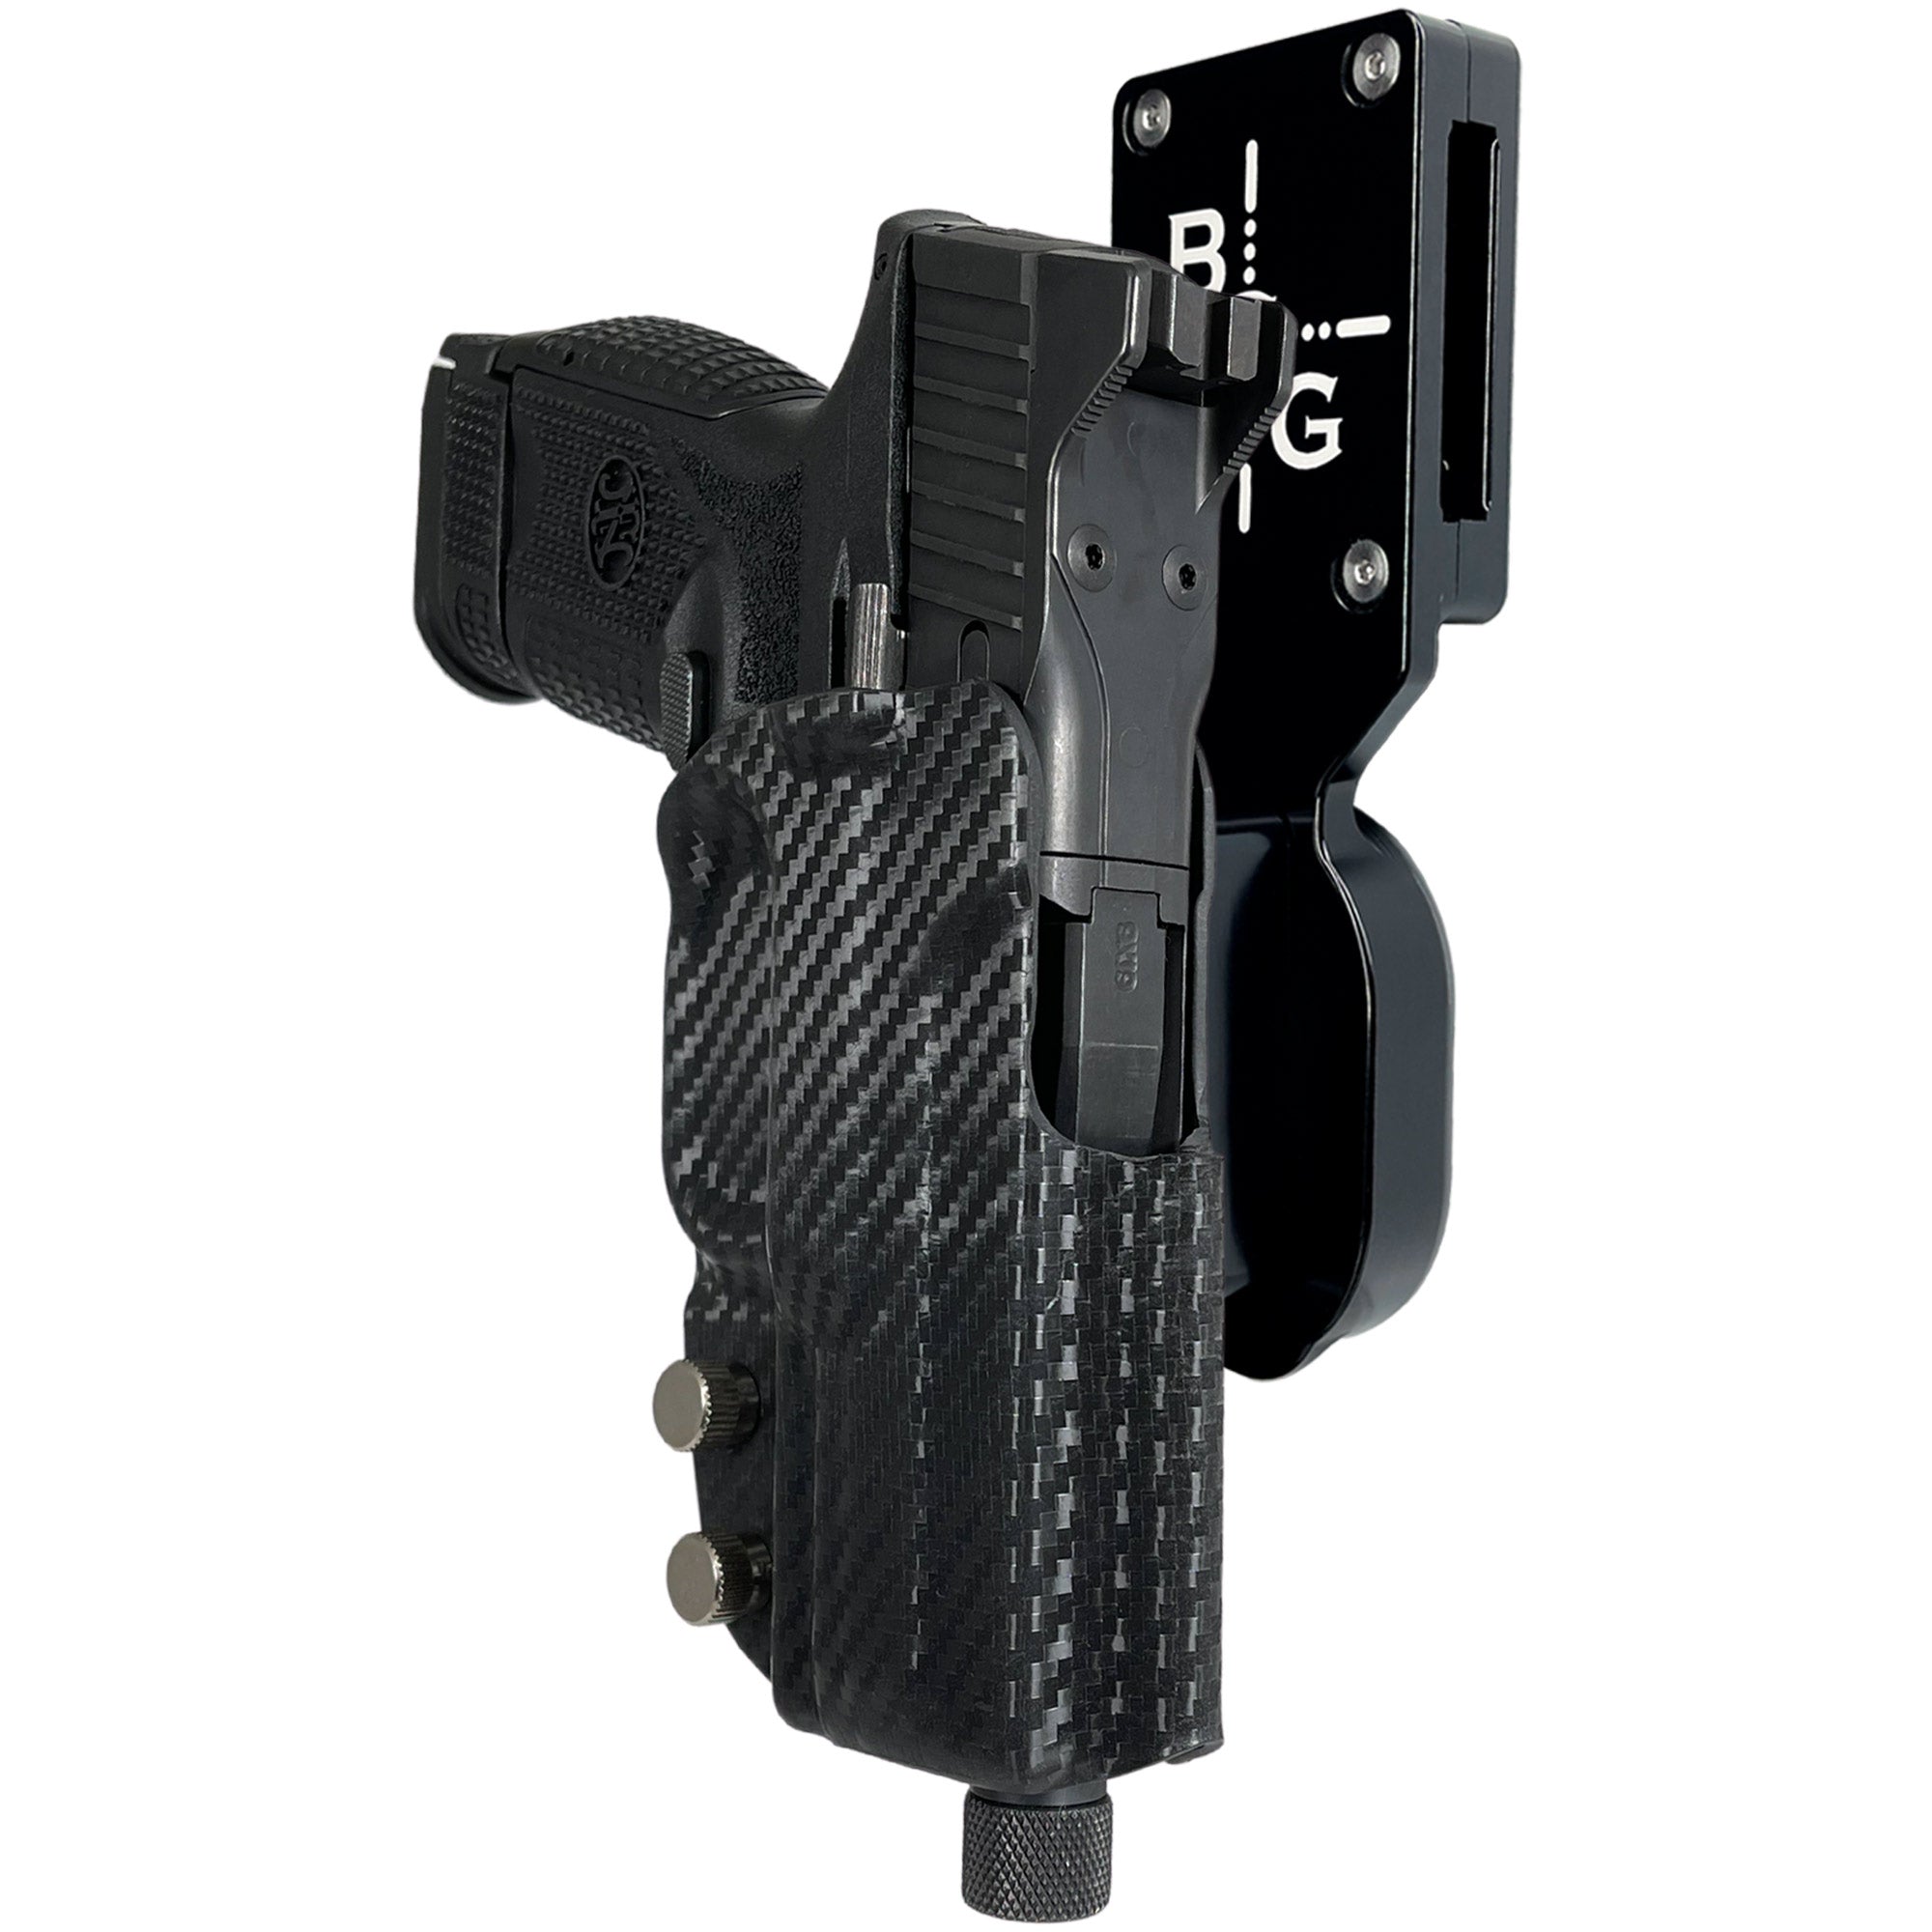 FNH 509 Compact/Midsize Pro Heavy Duty Competition Holster